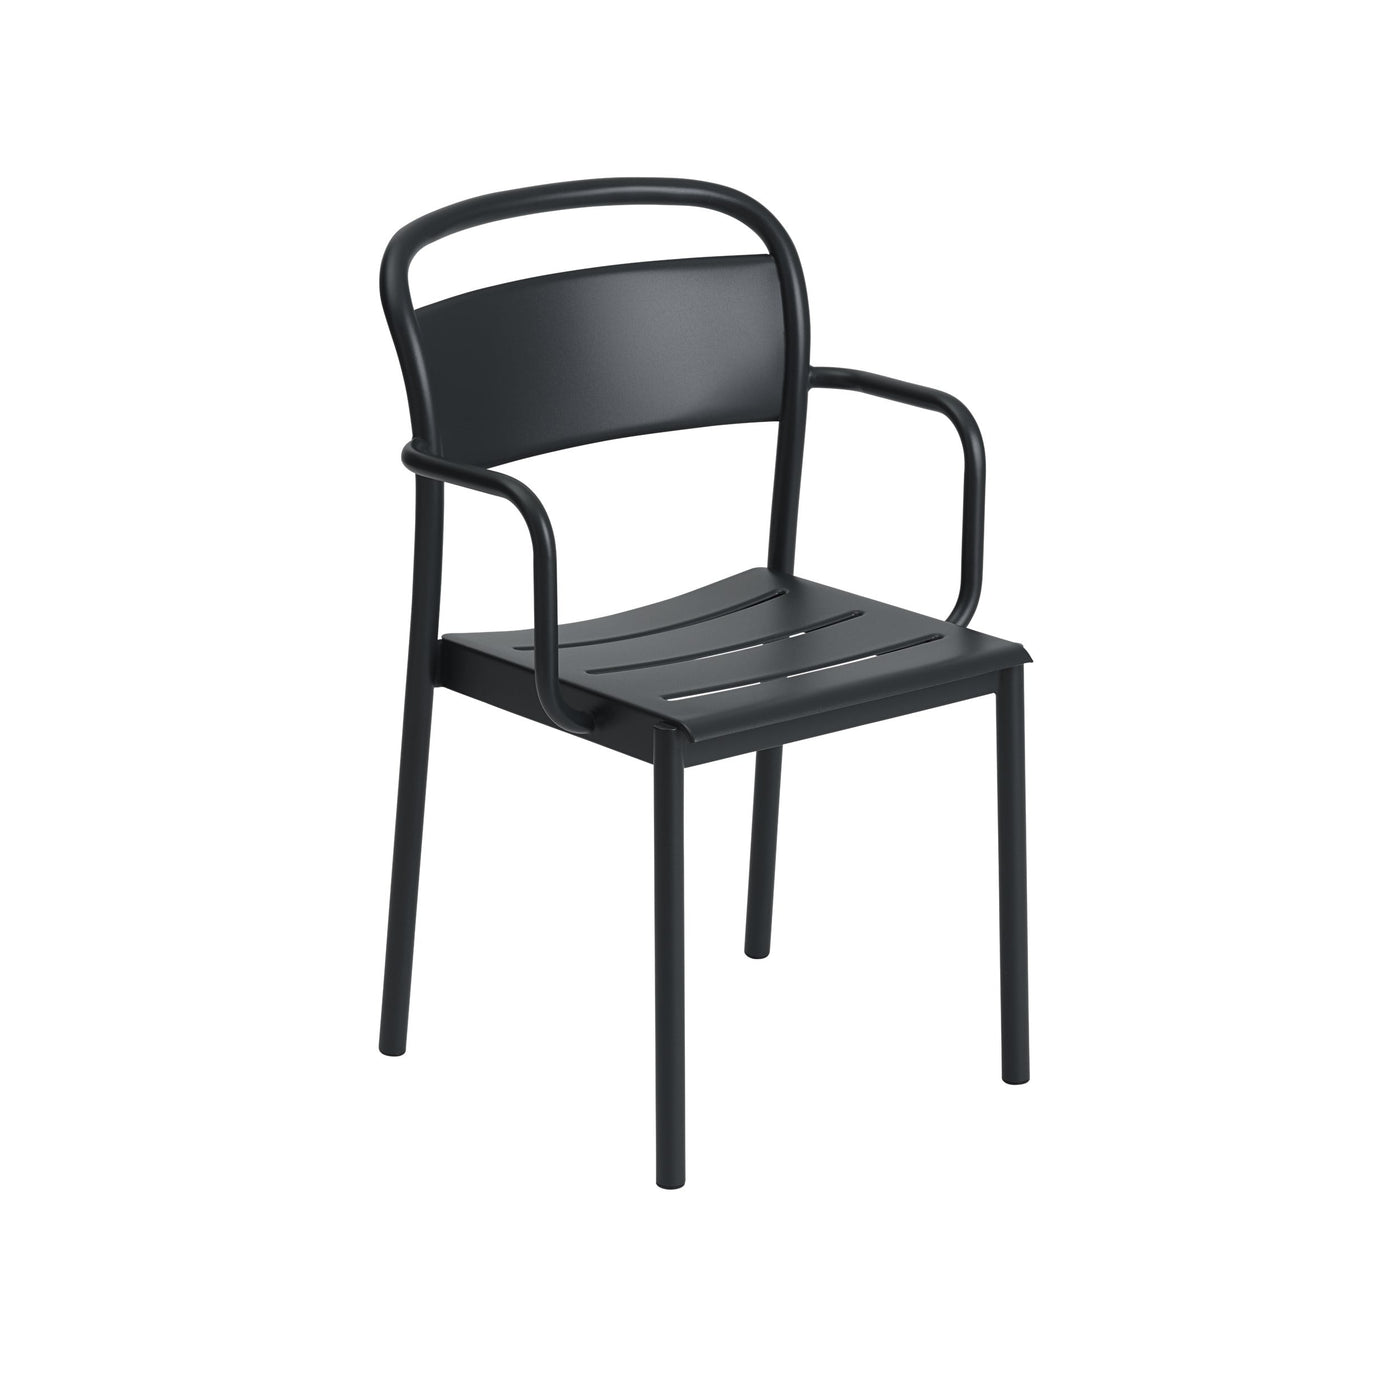 Muuto Linear Steel Armchair. Shop online at someday designs. #colour_black